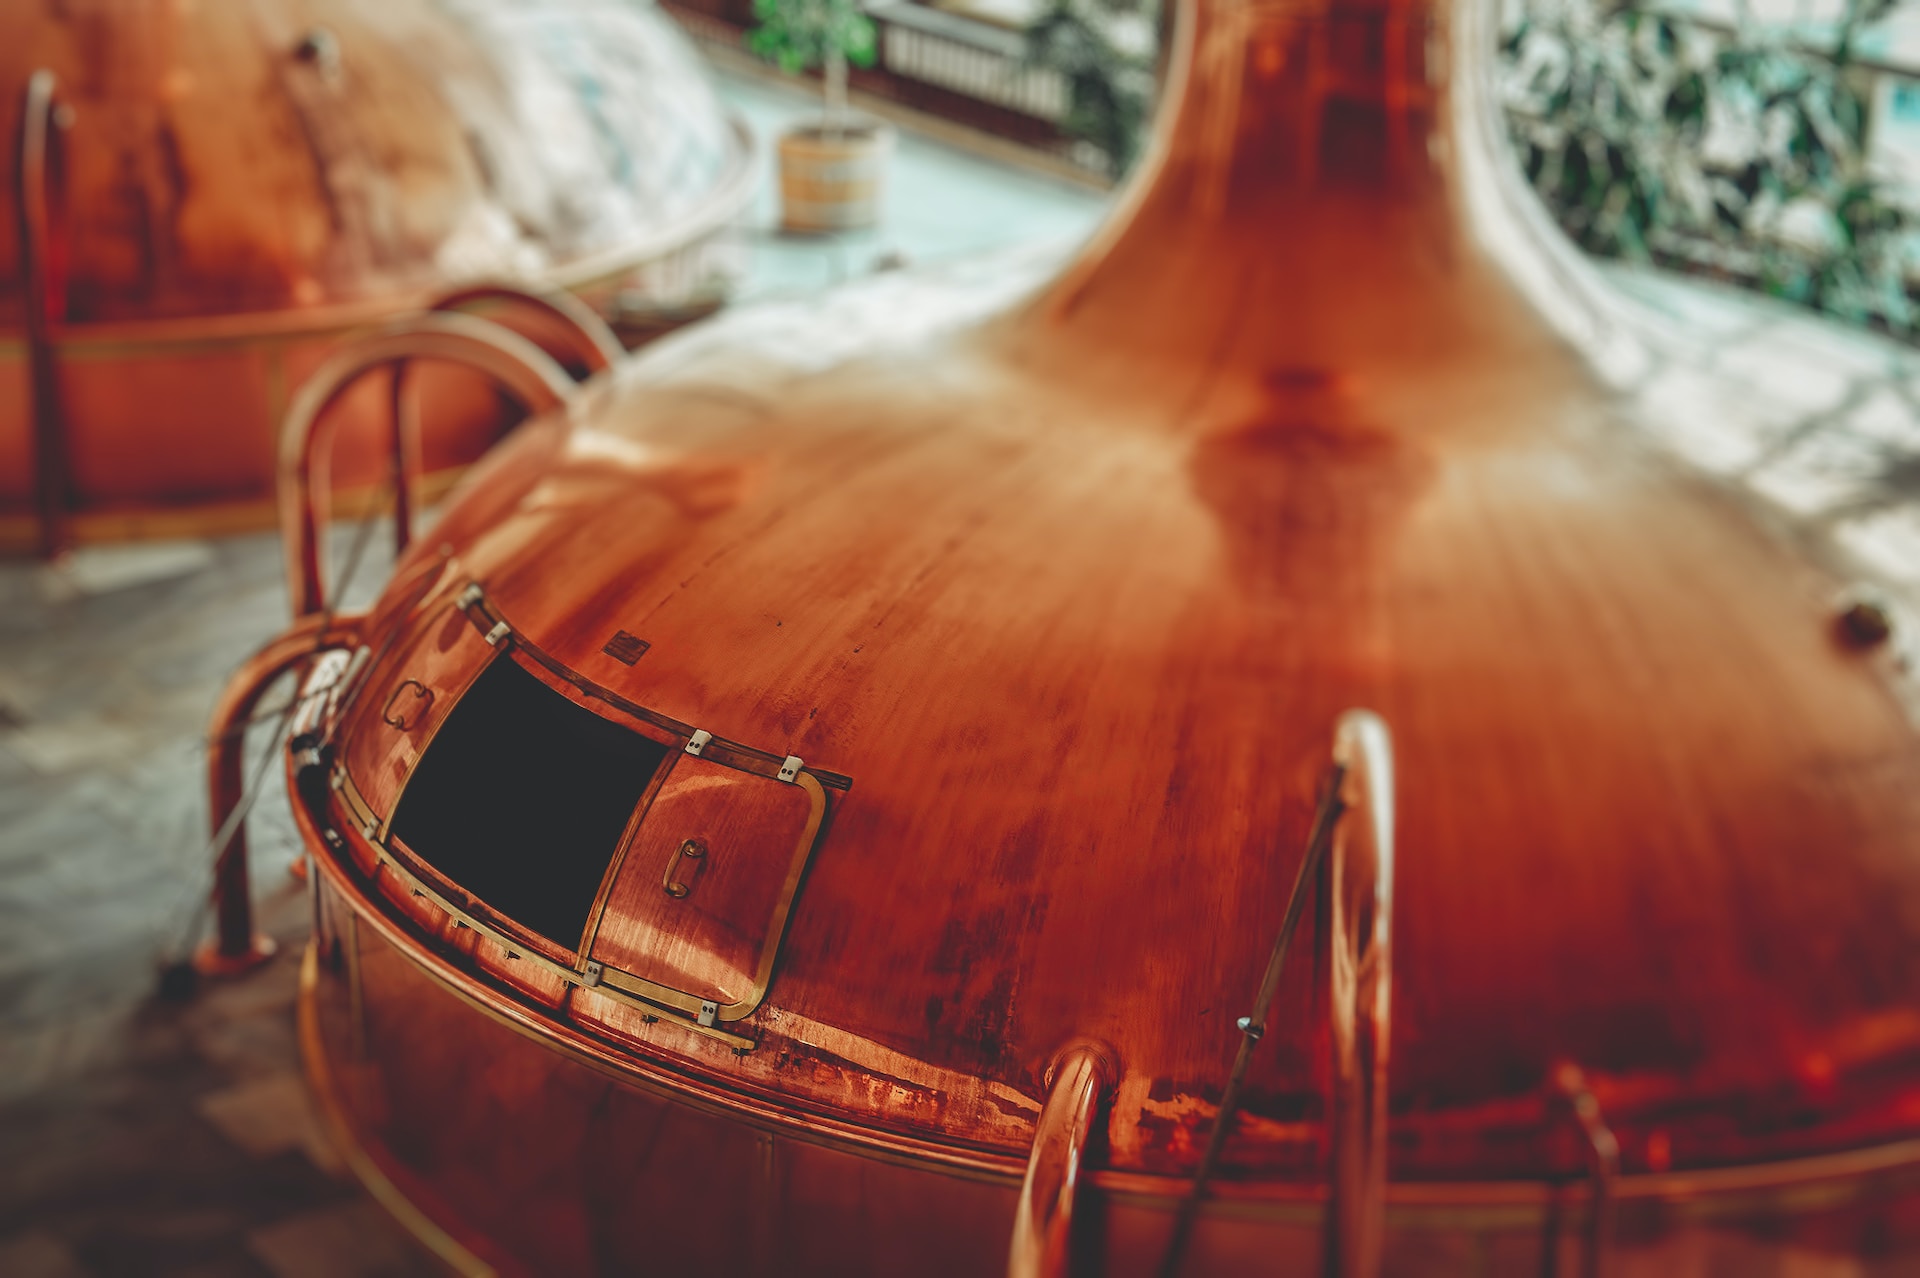 Distilling manufacturer to double capacity with expansion project